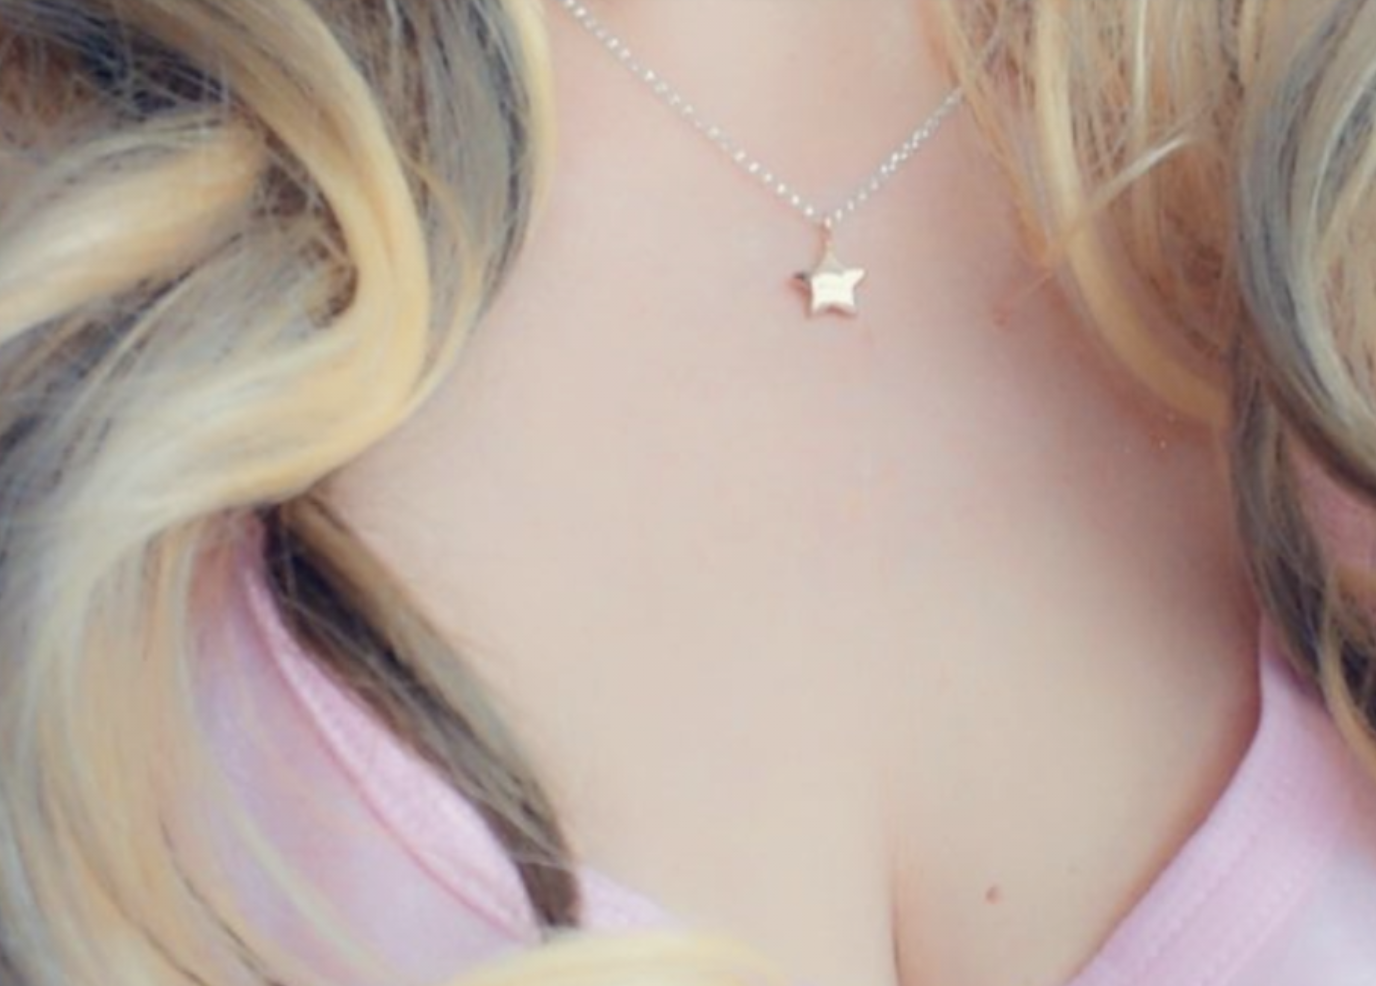 Sterling Silver Star Necklace - With Love Jewellery UK